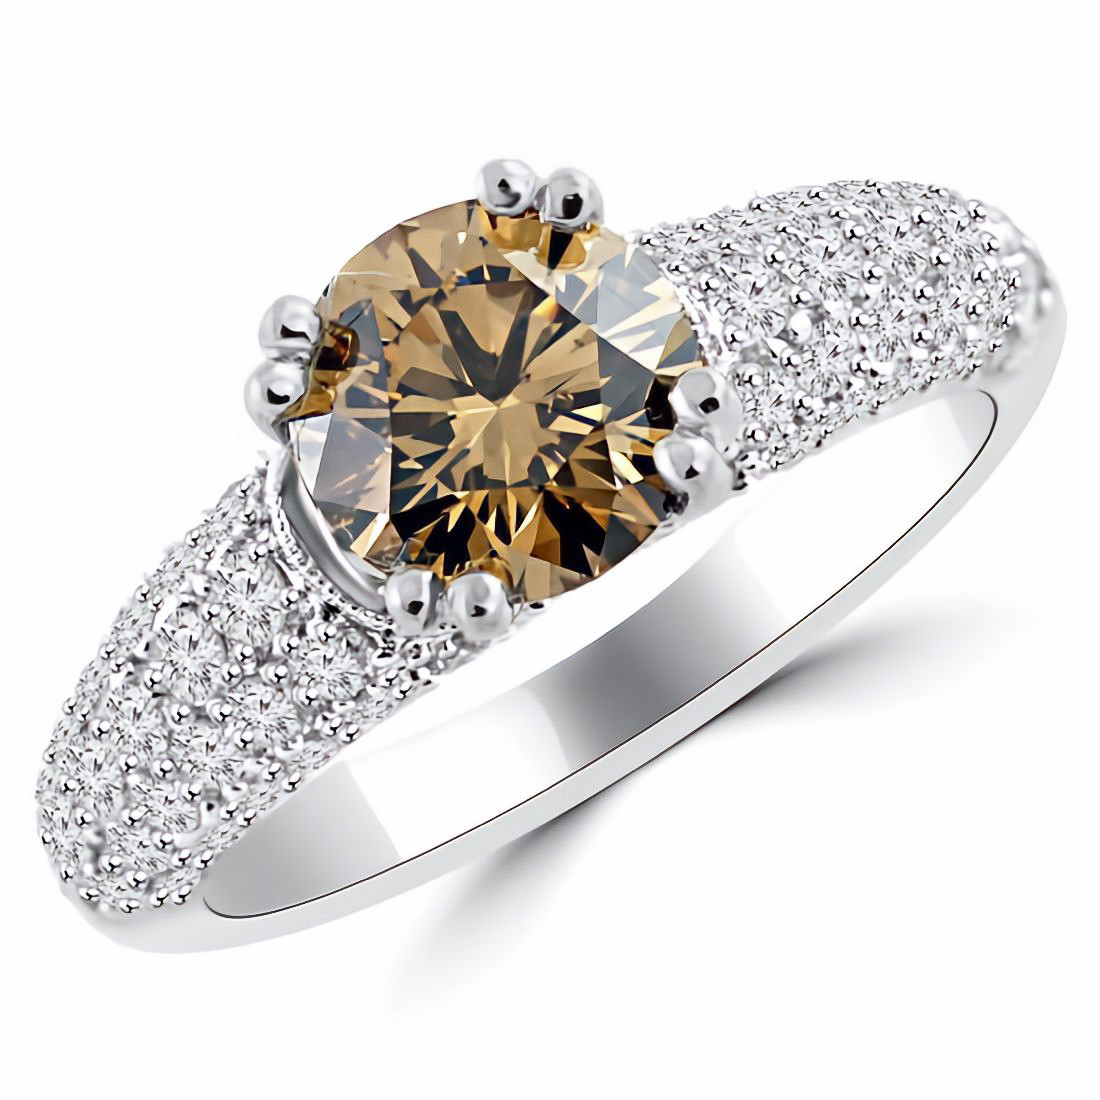 1/2 0.5 Carat 18K Rose Gold Round Brown Diamond 4 Prong Solitaire Diamond  Engagement Ring (AAA Quality) | Amazon.com